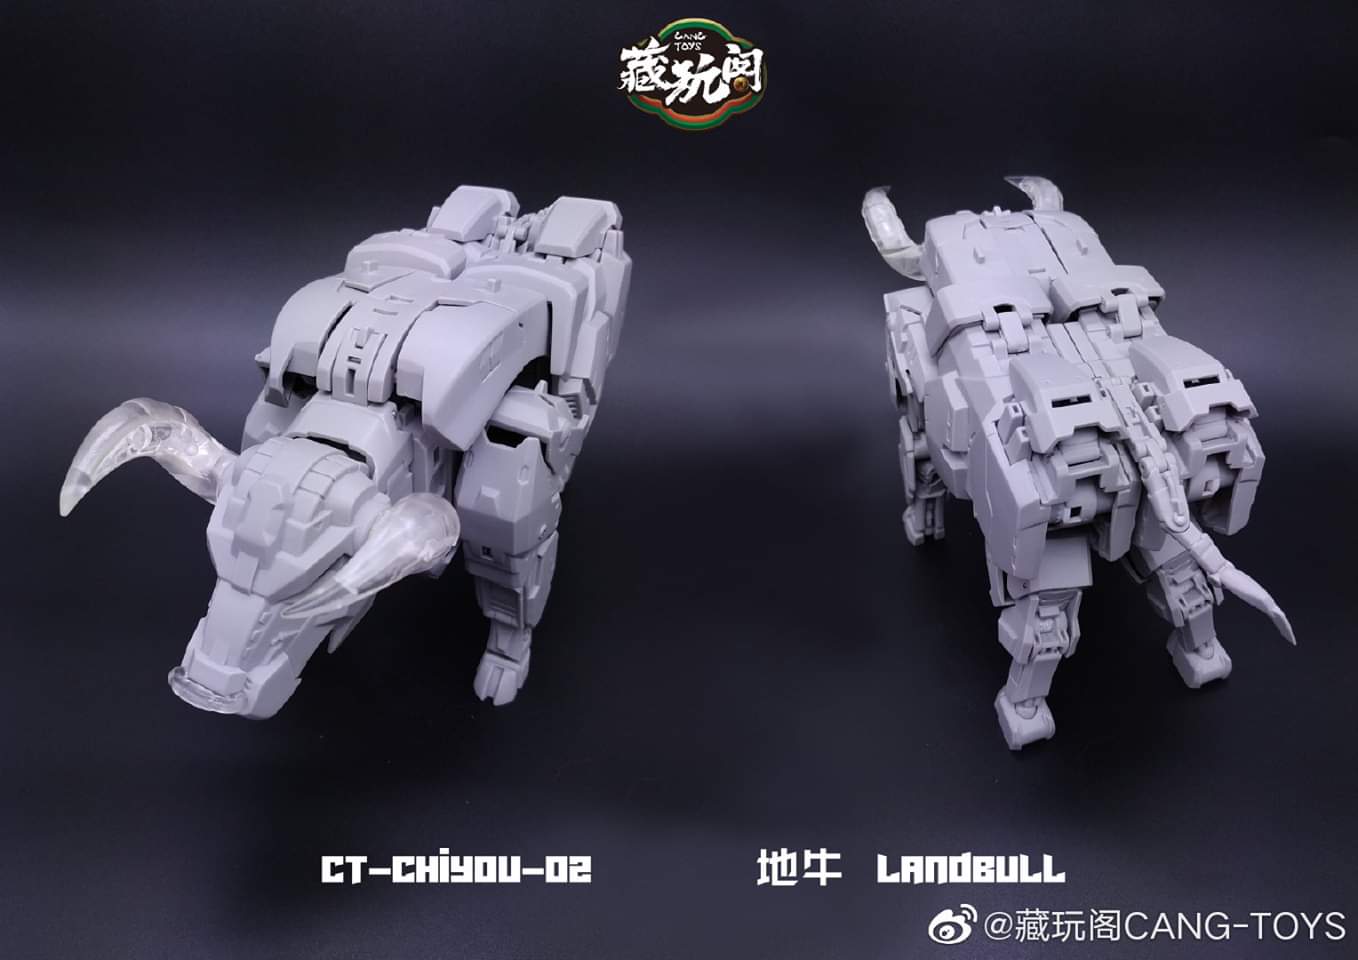 [Cang Toys] Produit Tiers - CT (format Masterpiece) & CY (format Legends) - Redesign inspiré des BD TF d'IDW 4frFVPWU_o